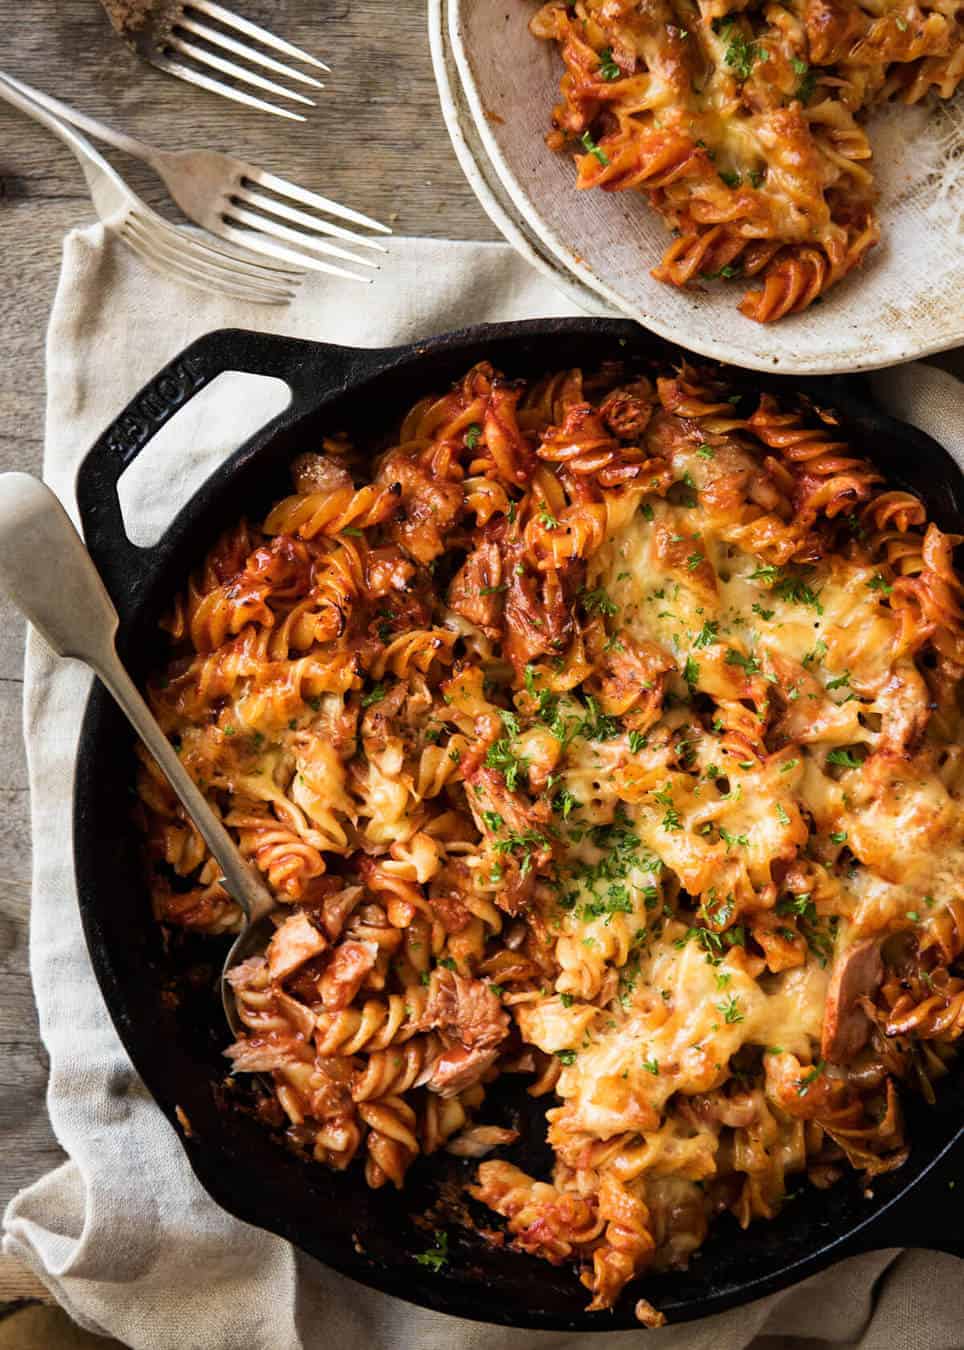 Everybody should know how to make a truly delicious Tuna Pasta Bake, for all those times when your cupboards are bare! www.recipetineats.com